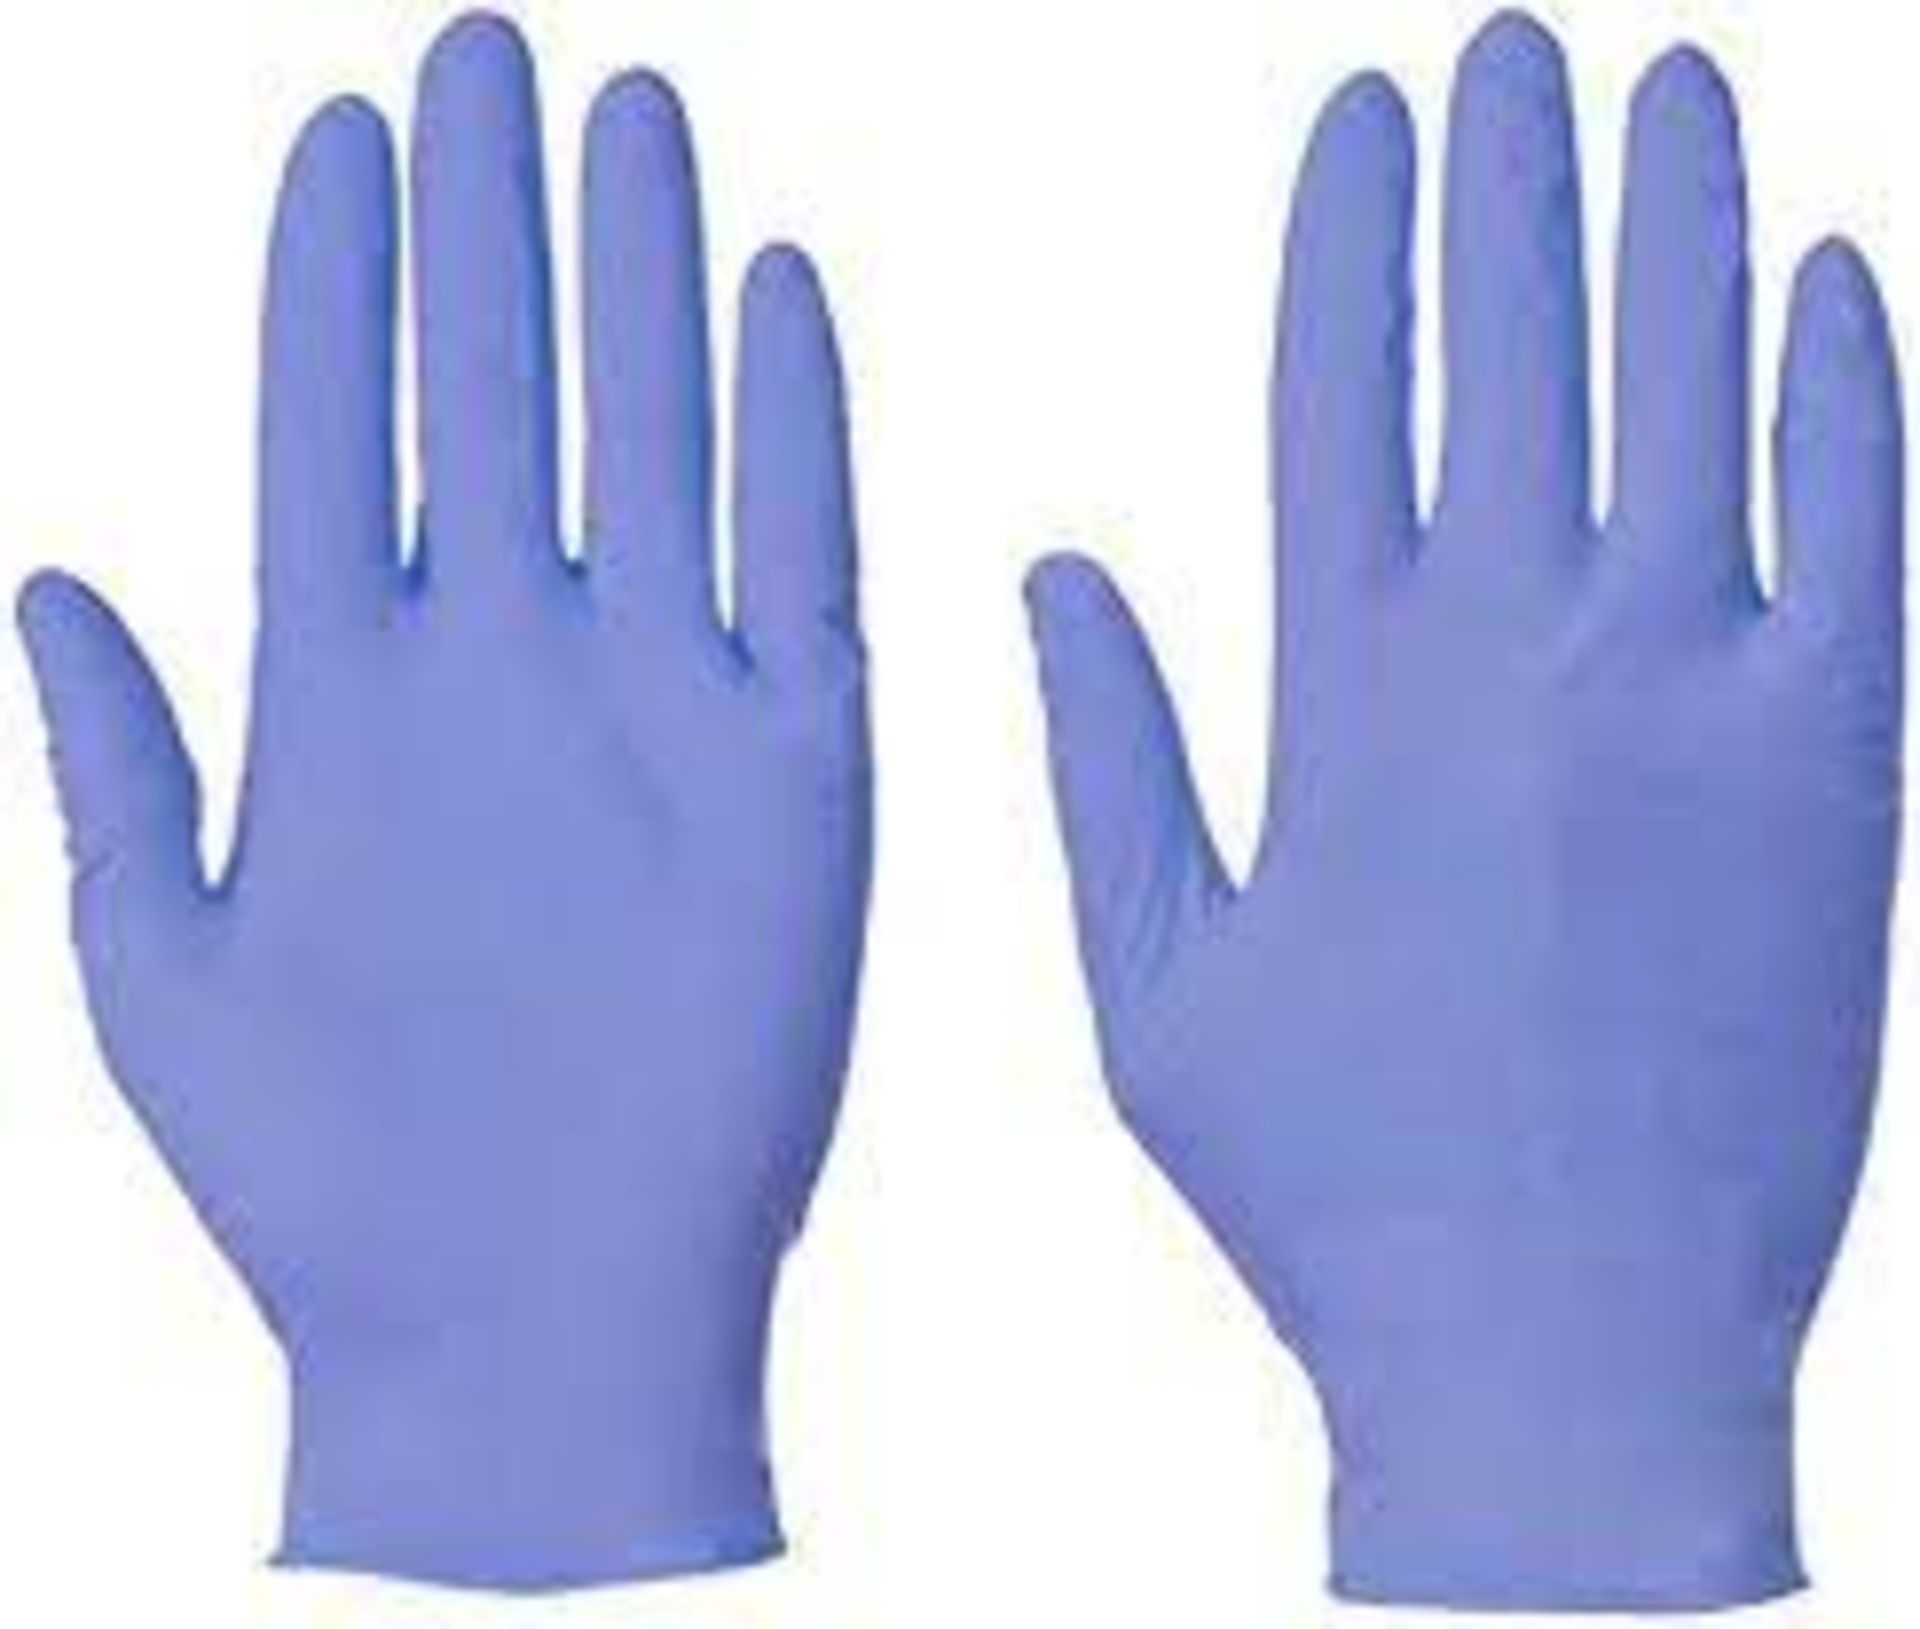 160 X BRAND NEW PACKS OF 100 SUPERTOUCH VINYL BLUE DISPOSABLE GLOVES SIZE XL EXP MAY 2025